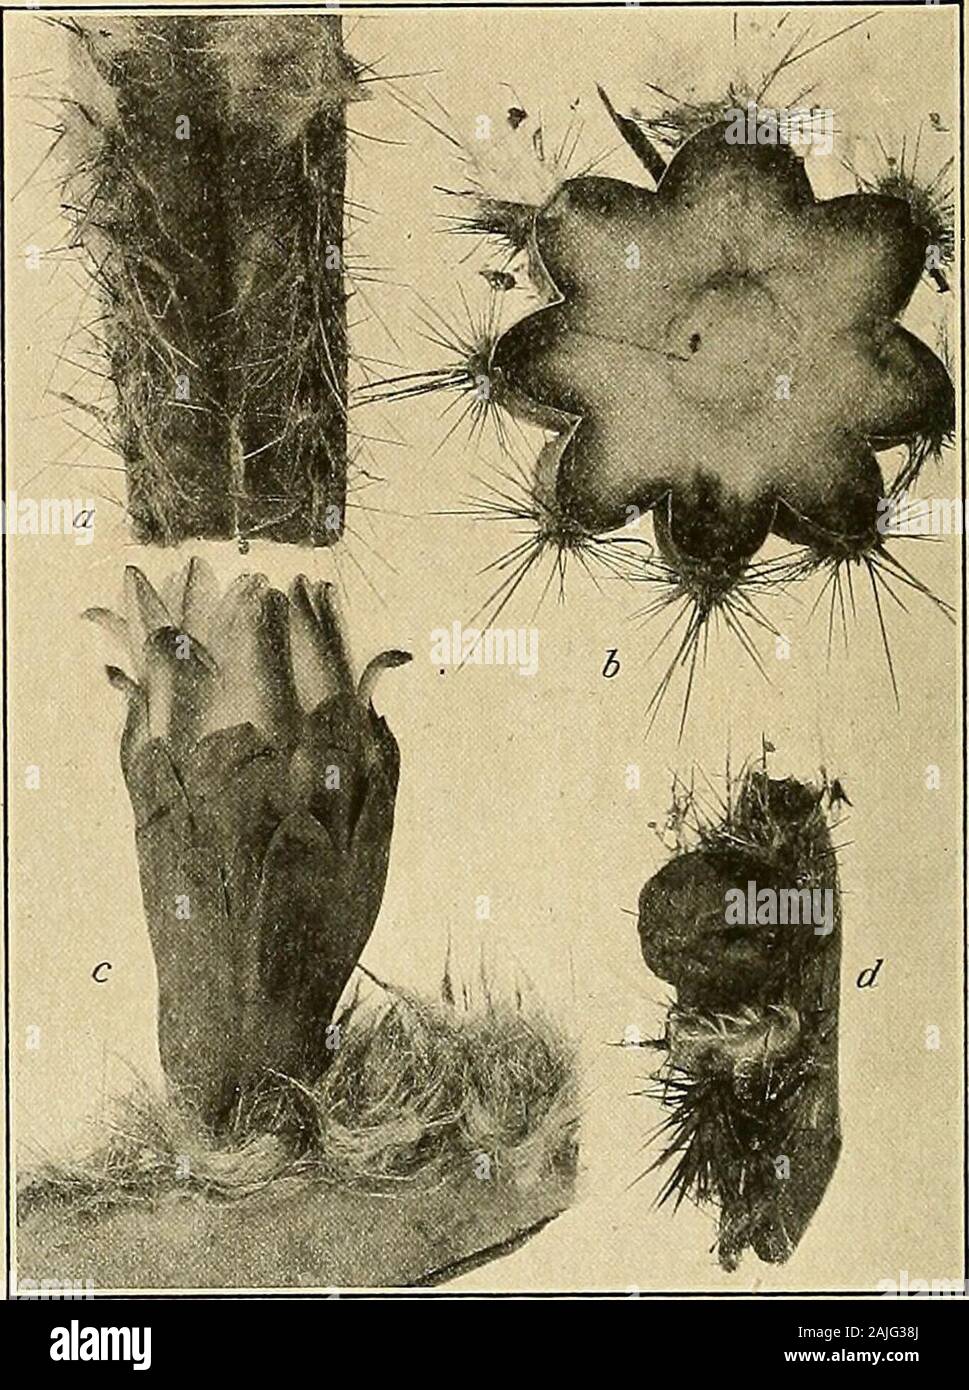 The Cactaceae : descriptions and illustrations of plants of the cactus family . ellow whenyoung, numerous, unequal, the longest 3 cm. long; flowers 6 to 8 cm. long, 6 cm. broad when fullyopen, with a broad throat, opening in the evening, odorless; flower-tube short, about 1 cm. long, withbroad scales near its top, these green with brownish margins; perianth-segments numerous, broad,short, white, stiff; anthers dehiscing soon after the flowers open; filaments short, the lower onesmuch longer than the upper one but all included, attached all over the throat; style stout, soonexserted, at first r Stock Photo